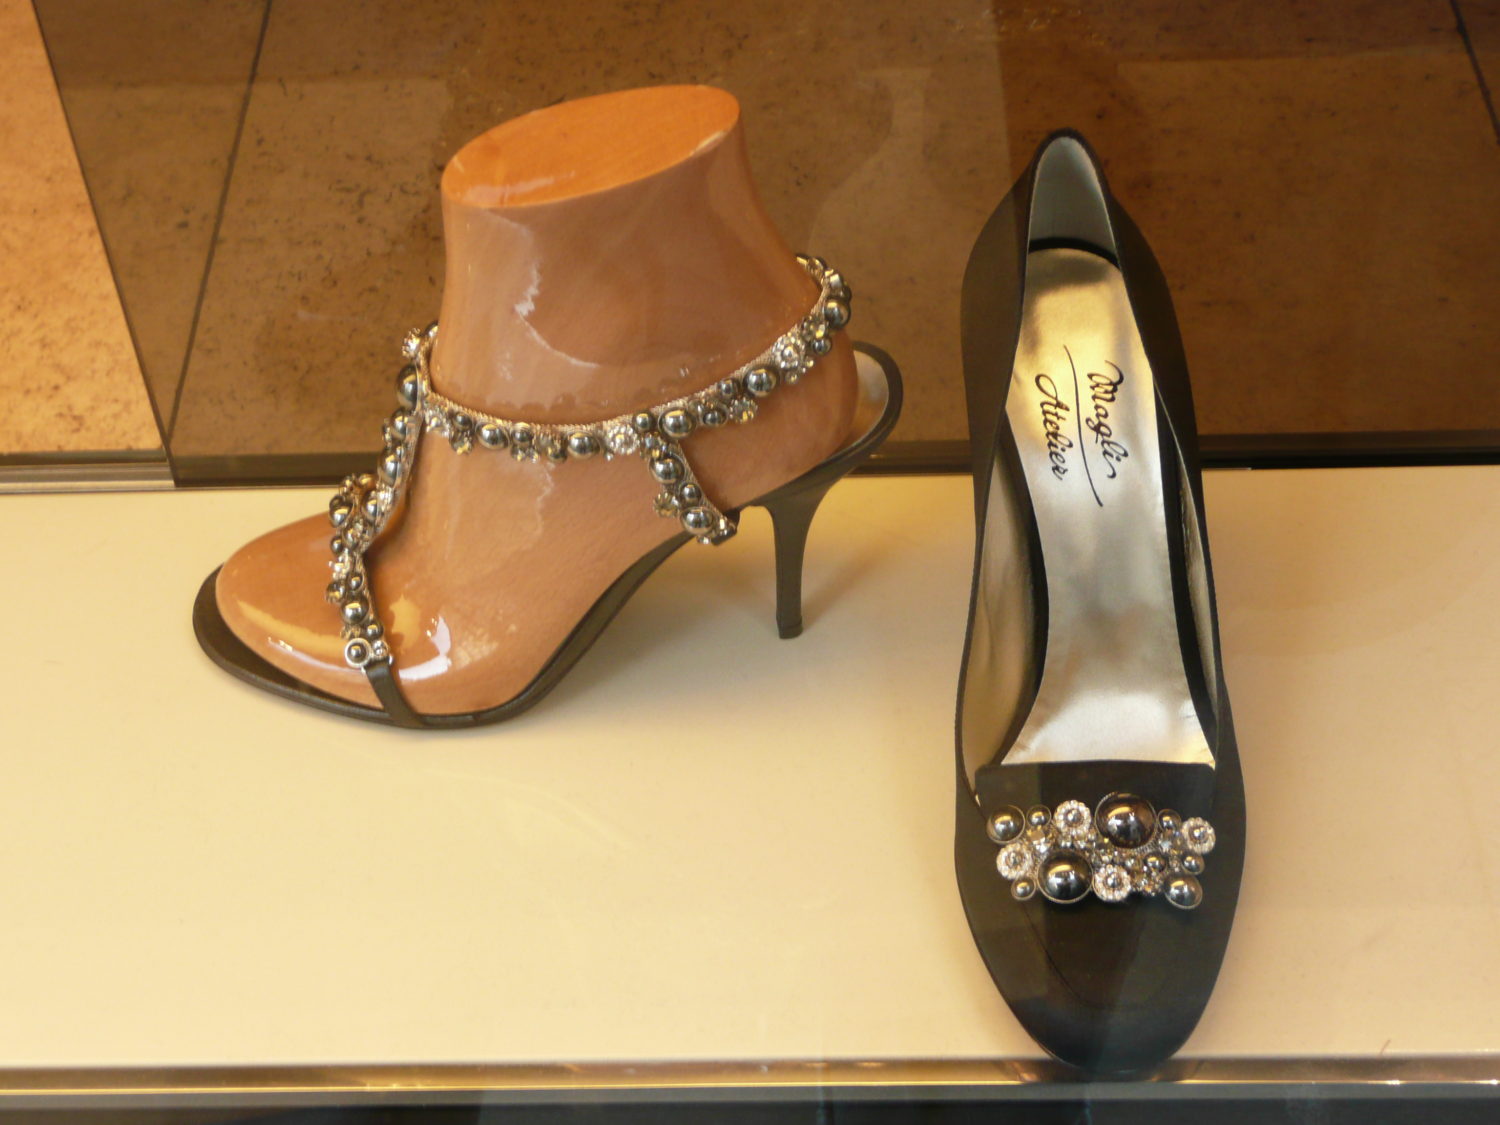 Heels for sale on Europe's most expensive street